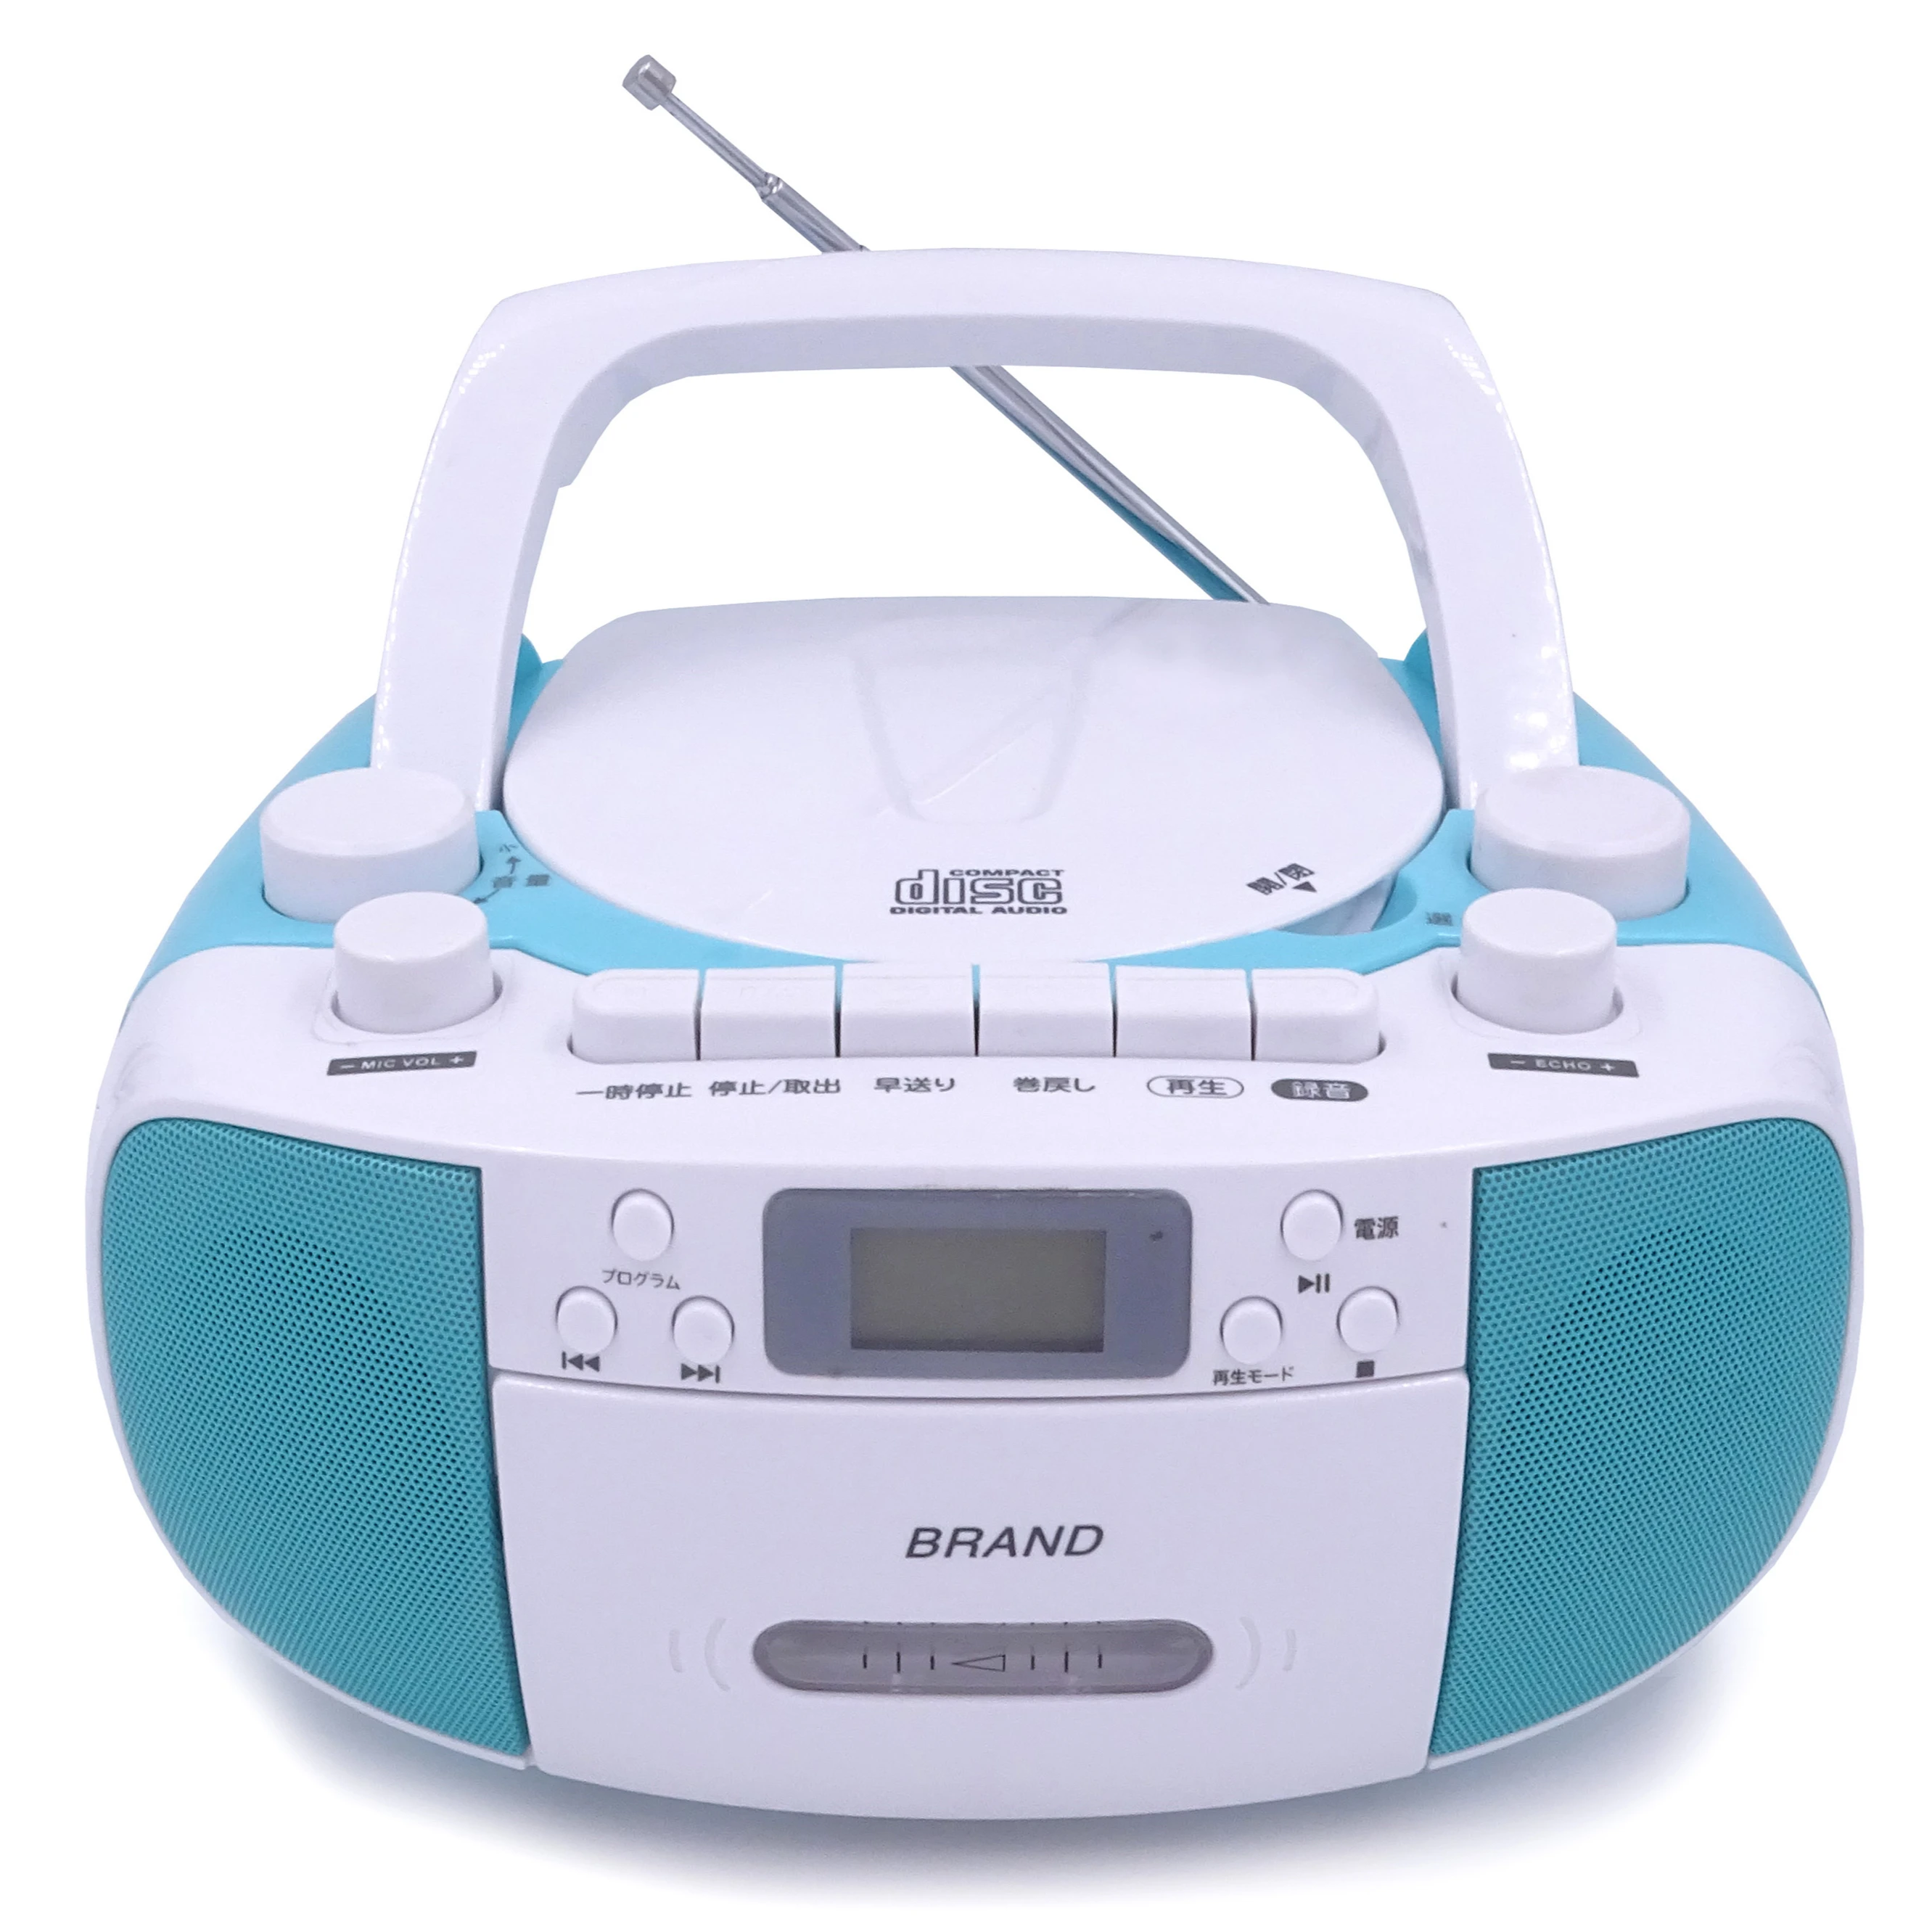 Portable CD Boombox Player with AM/FM/Cassette Radio (10000011588325)